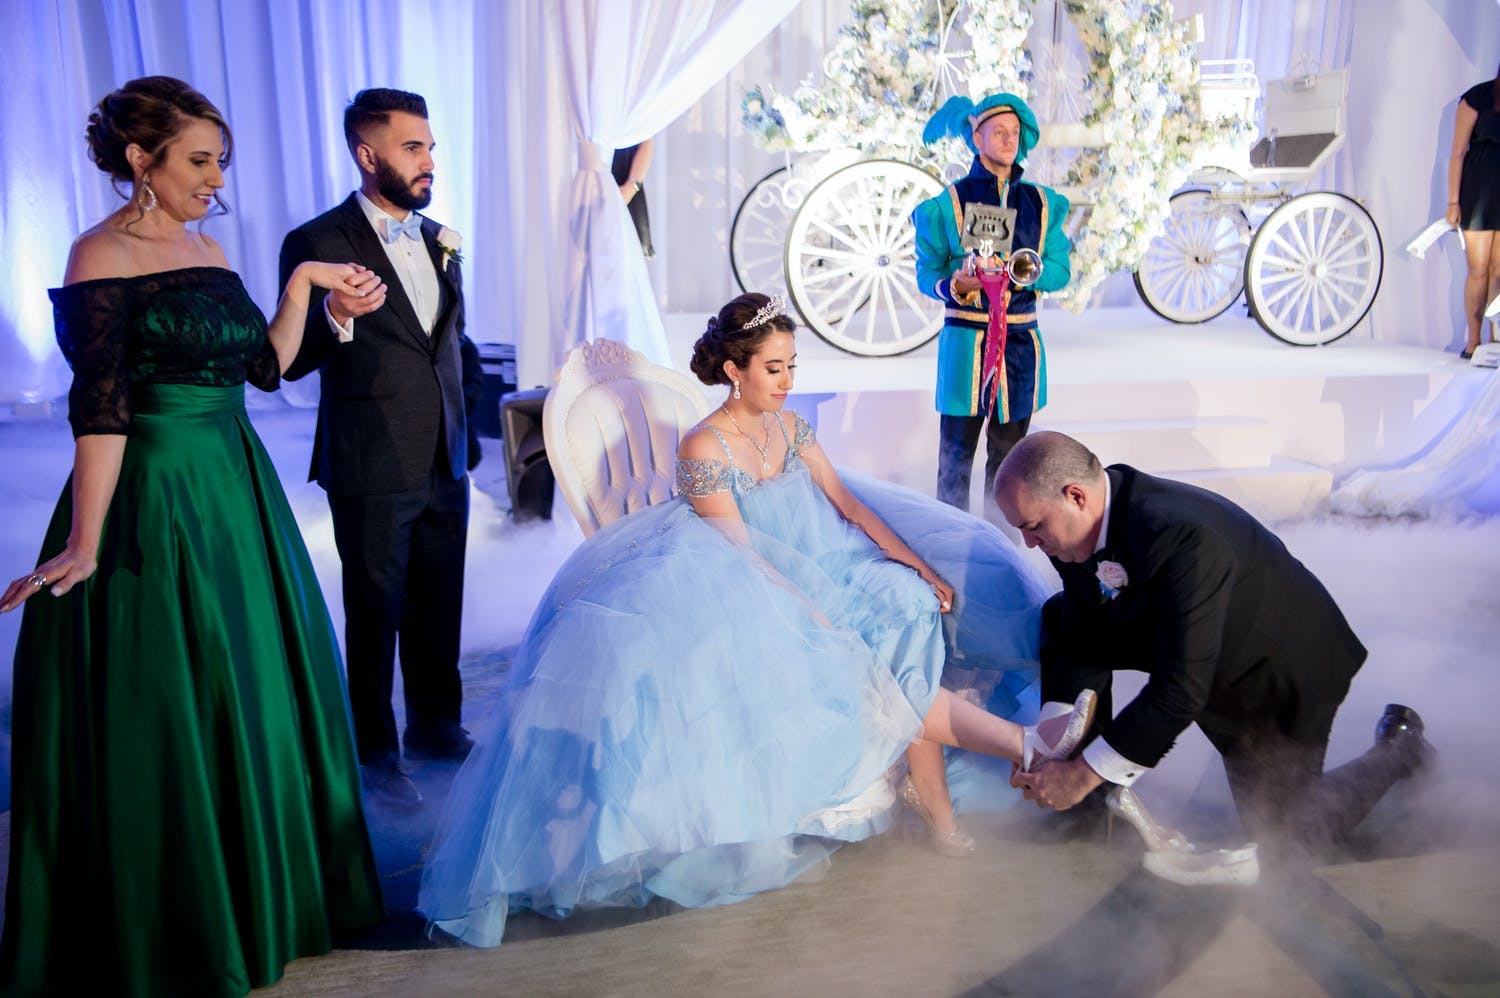 Father changes quinceañera's shoes to represent her transition into adulthood | PartySlate